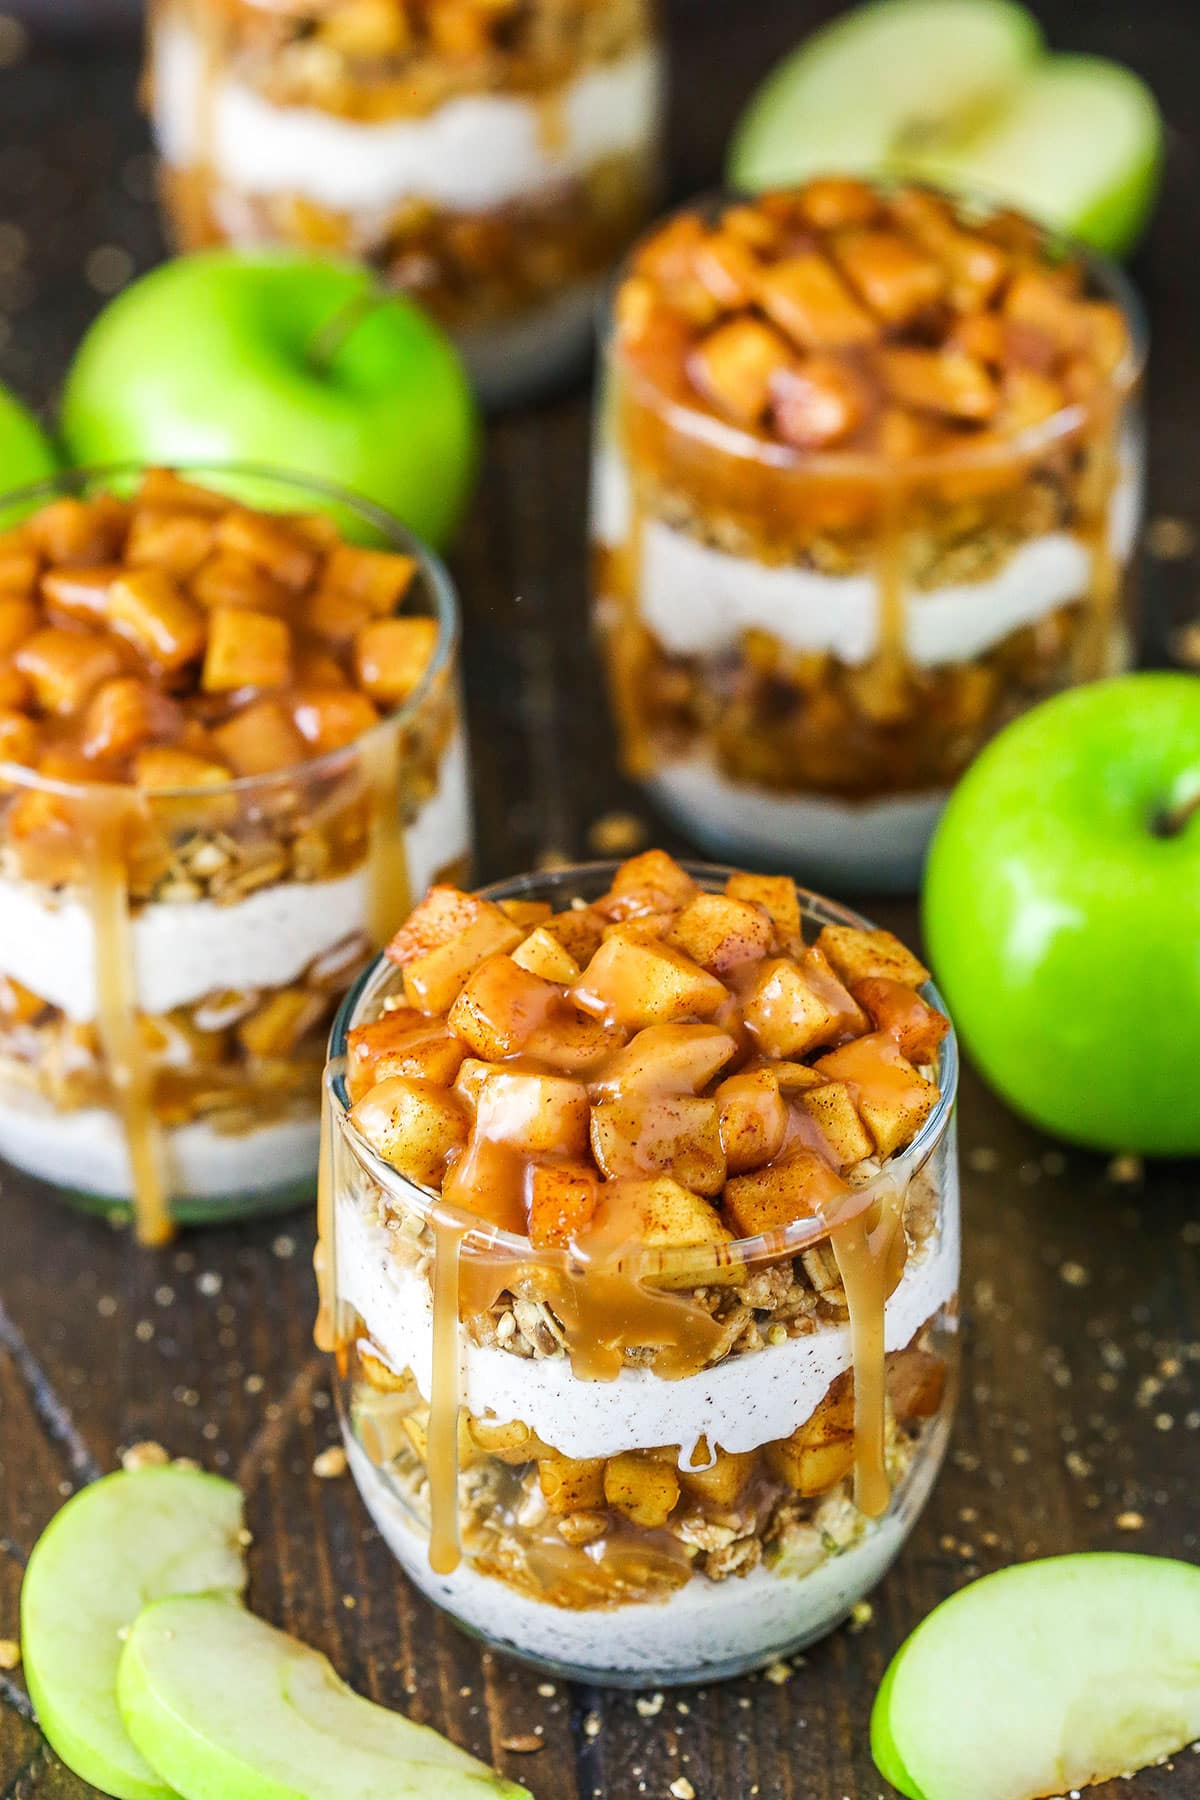 Overhead view of Caramel Apple Trifles with some apples around them